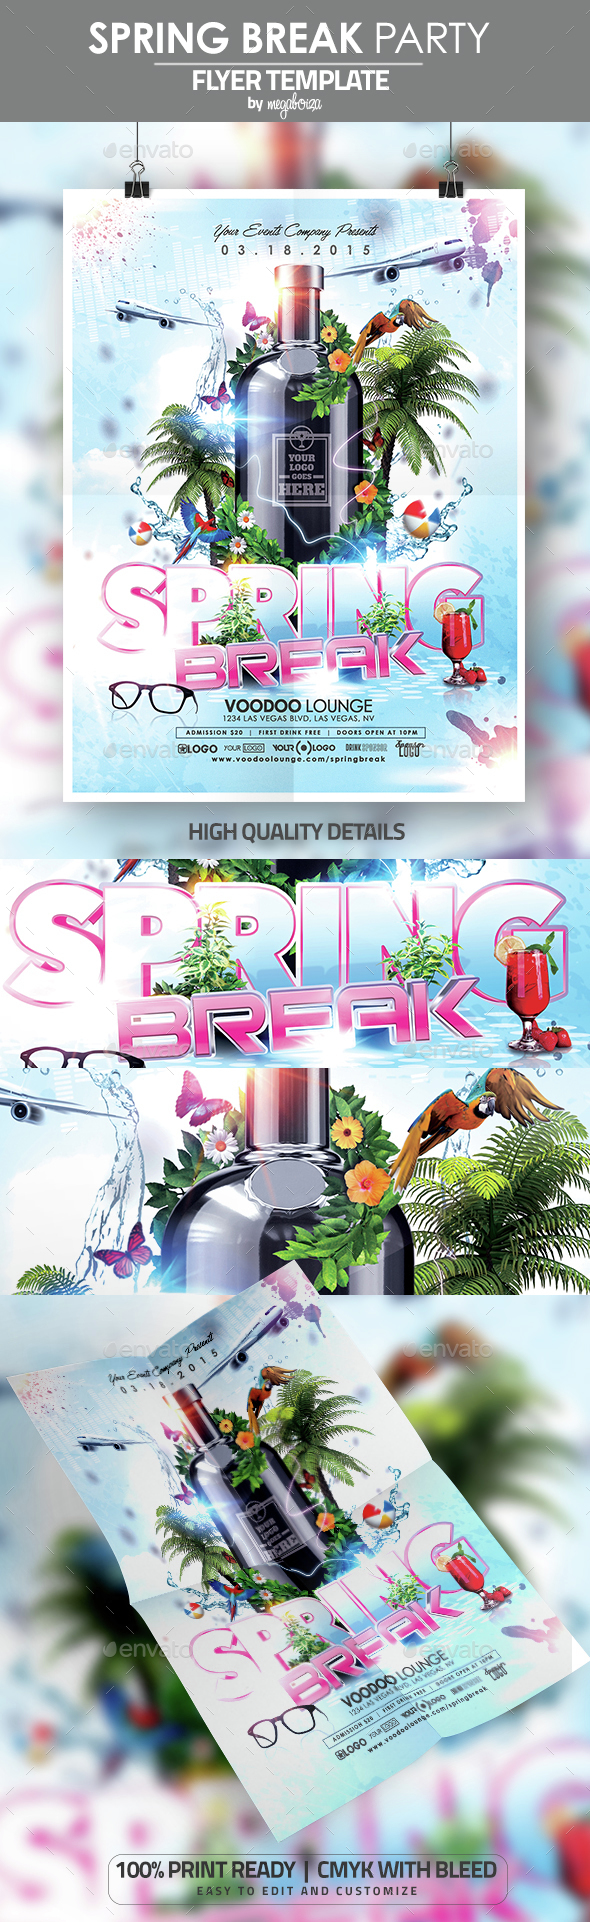 Spring Break Party Flyer / Poster Template